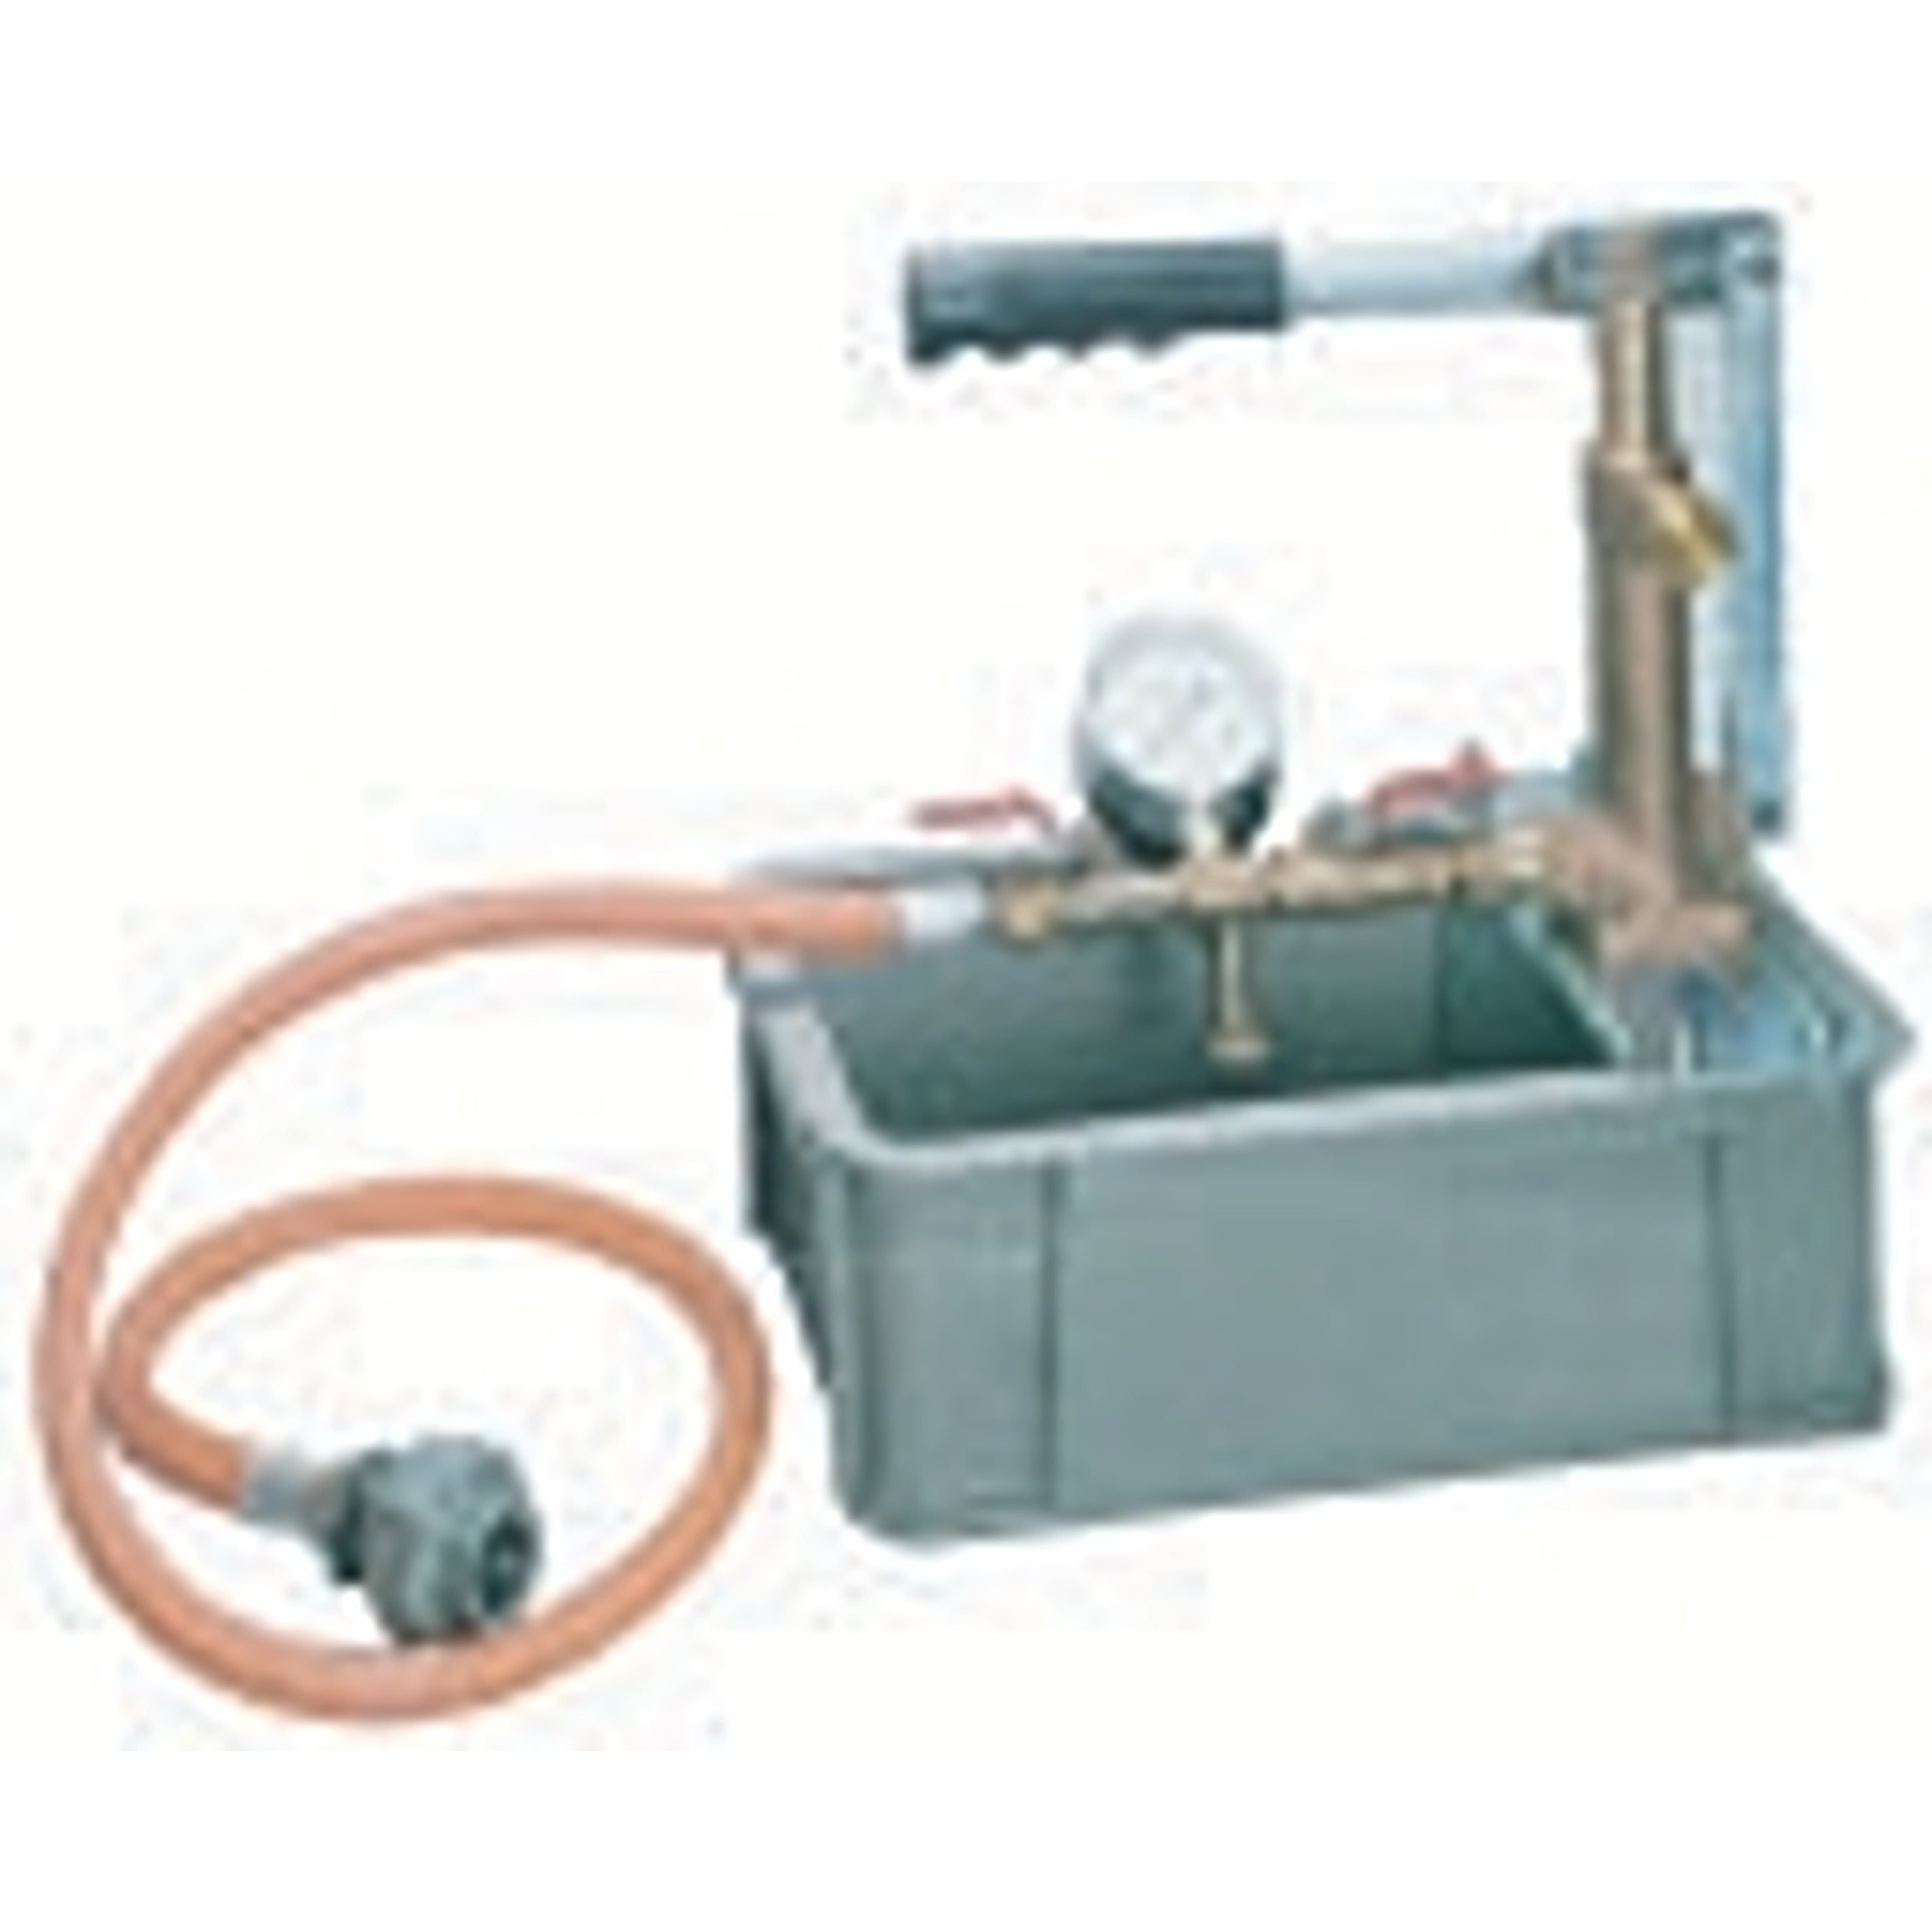 YEW AIK AA00021 Hydraulic Pressure Test Pump Model T-50K-P 50 cm2 - Premium Pressure Test Pump from YEW AIK - Shop now at Yew Aik.